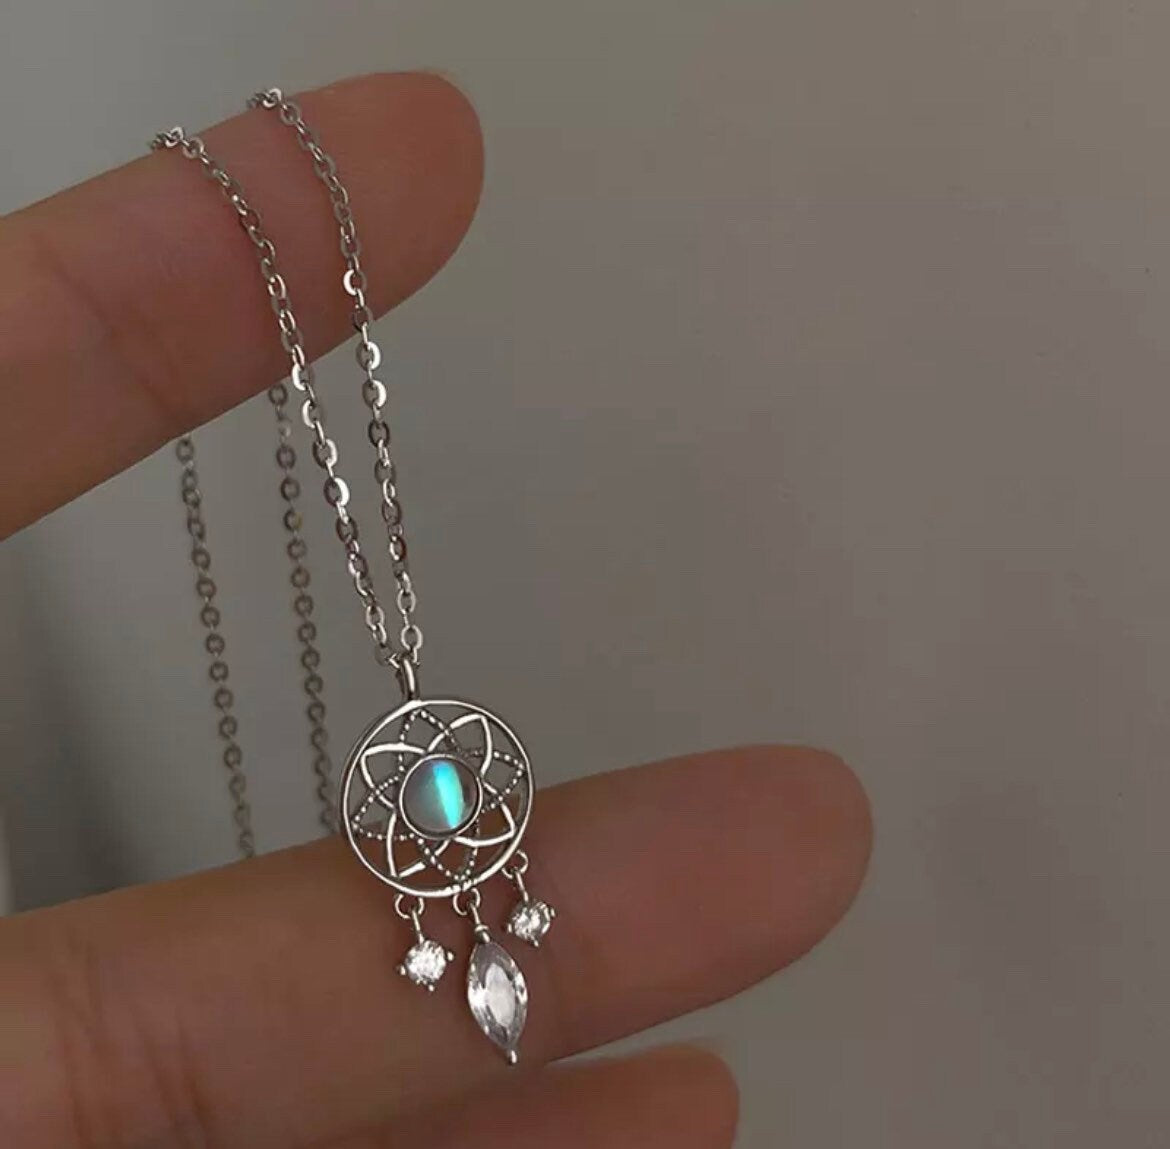 Minimalist Silver Dream Catcher Moonstone Pendent Necklace For Women,Personality,Crystal Blue Stone,Geometric Necklace,Luxury Jewellery